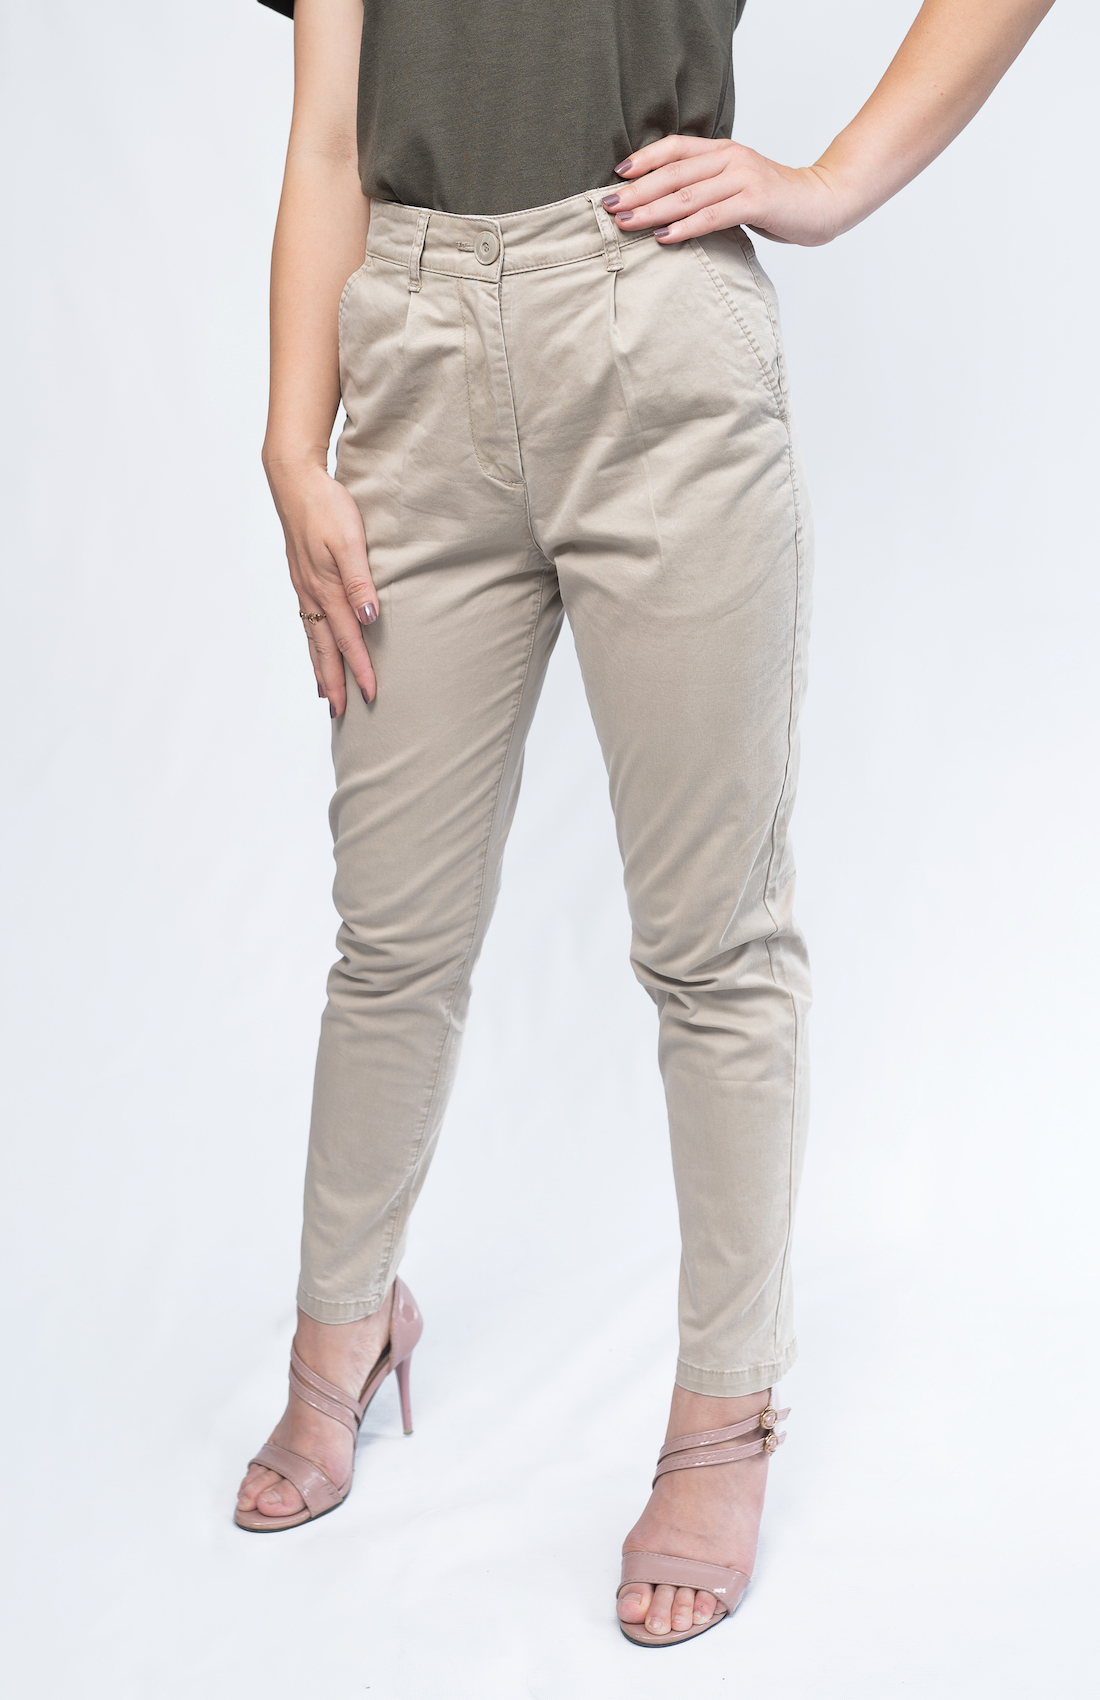 LOGO | Ethical Clothing Brand. Made In Nepal | Women's Twill Pant